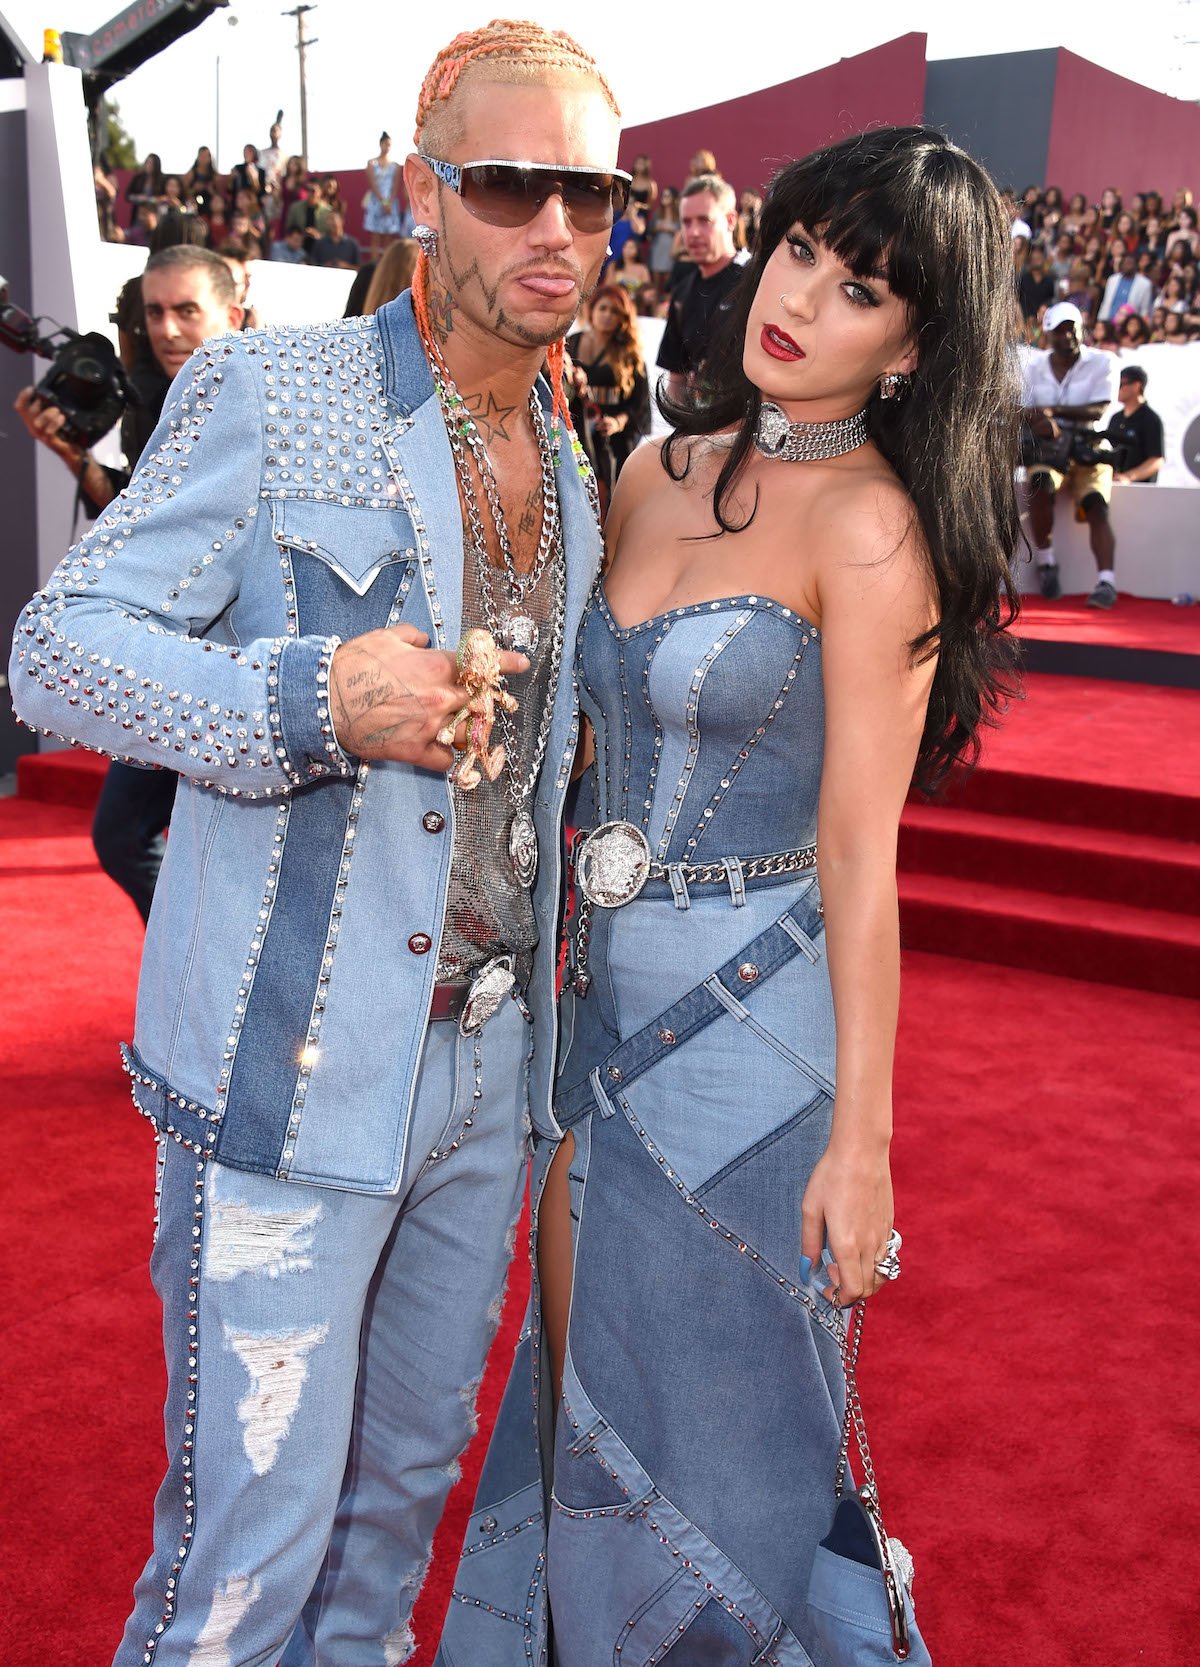 Riff Raff and Katy Perry pose in matching denim outfits.